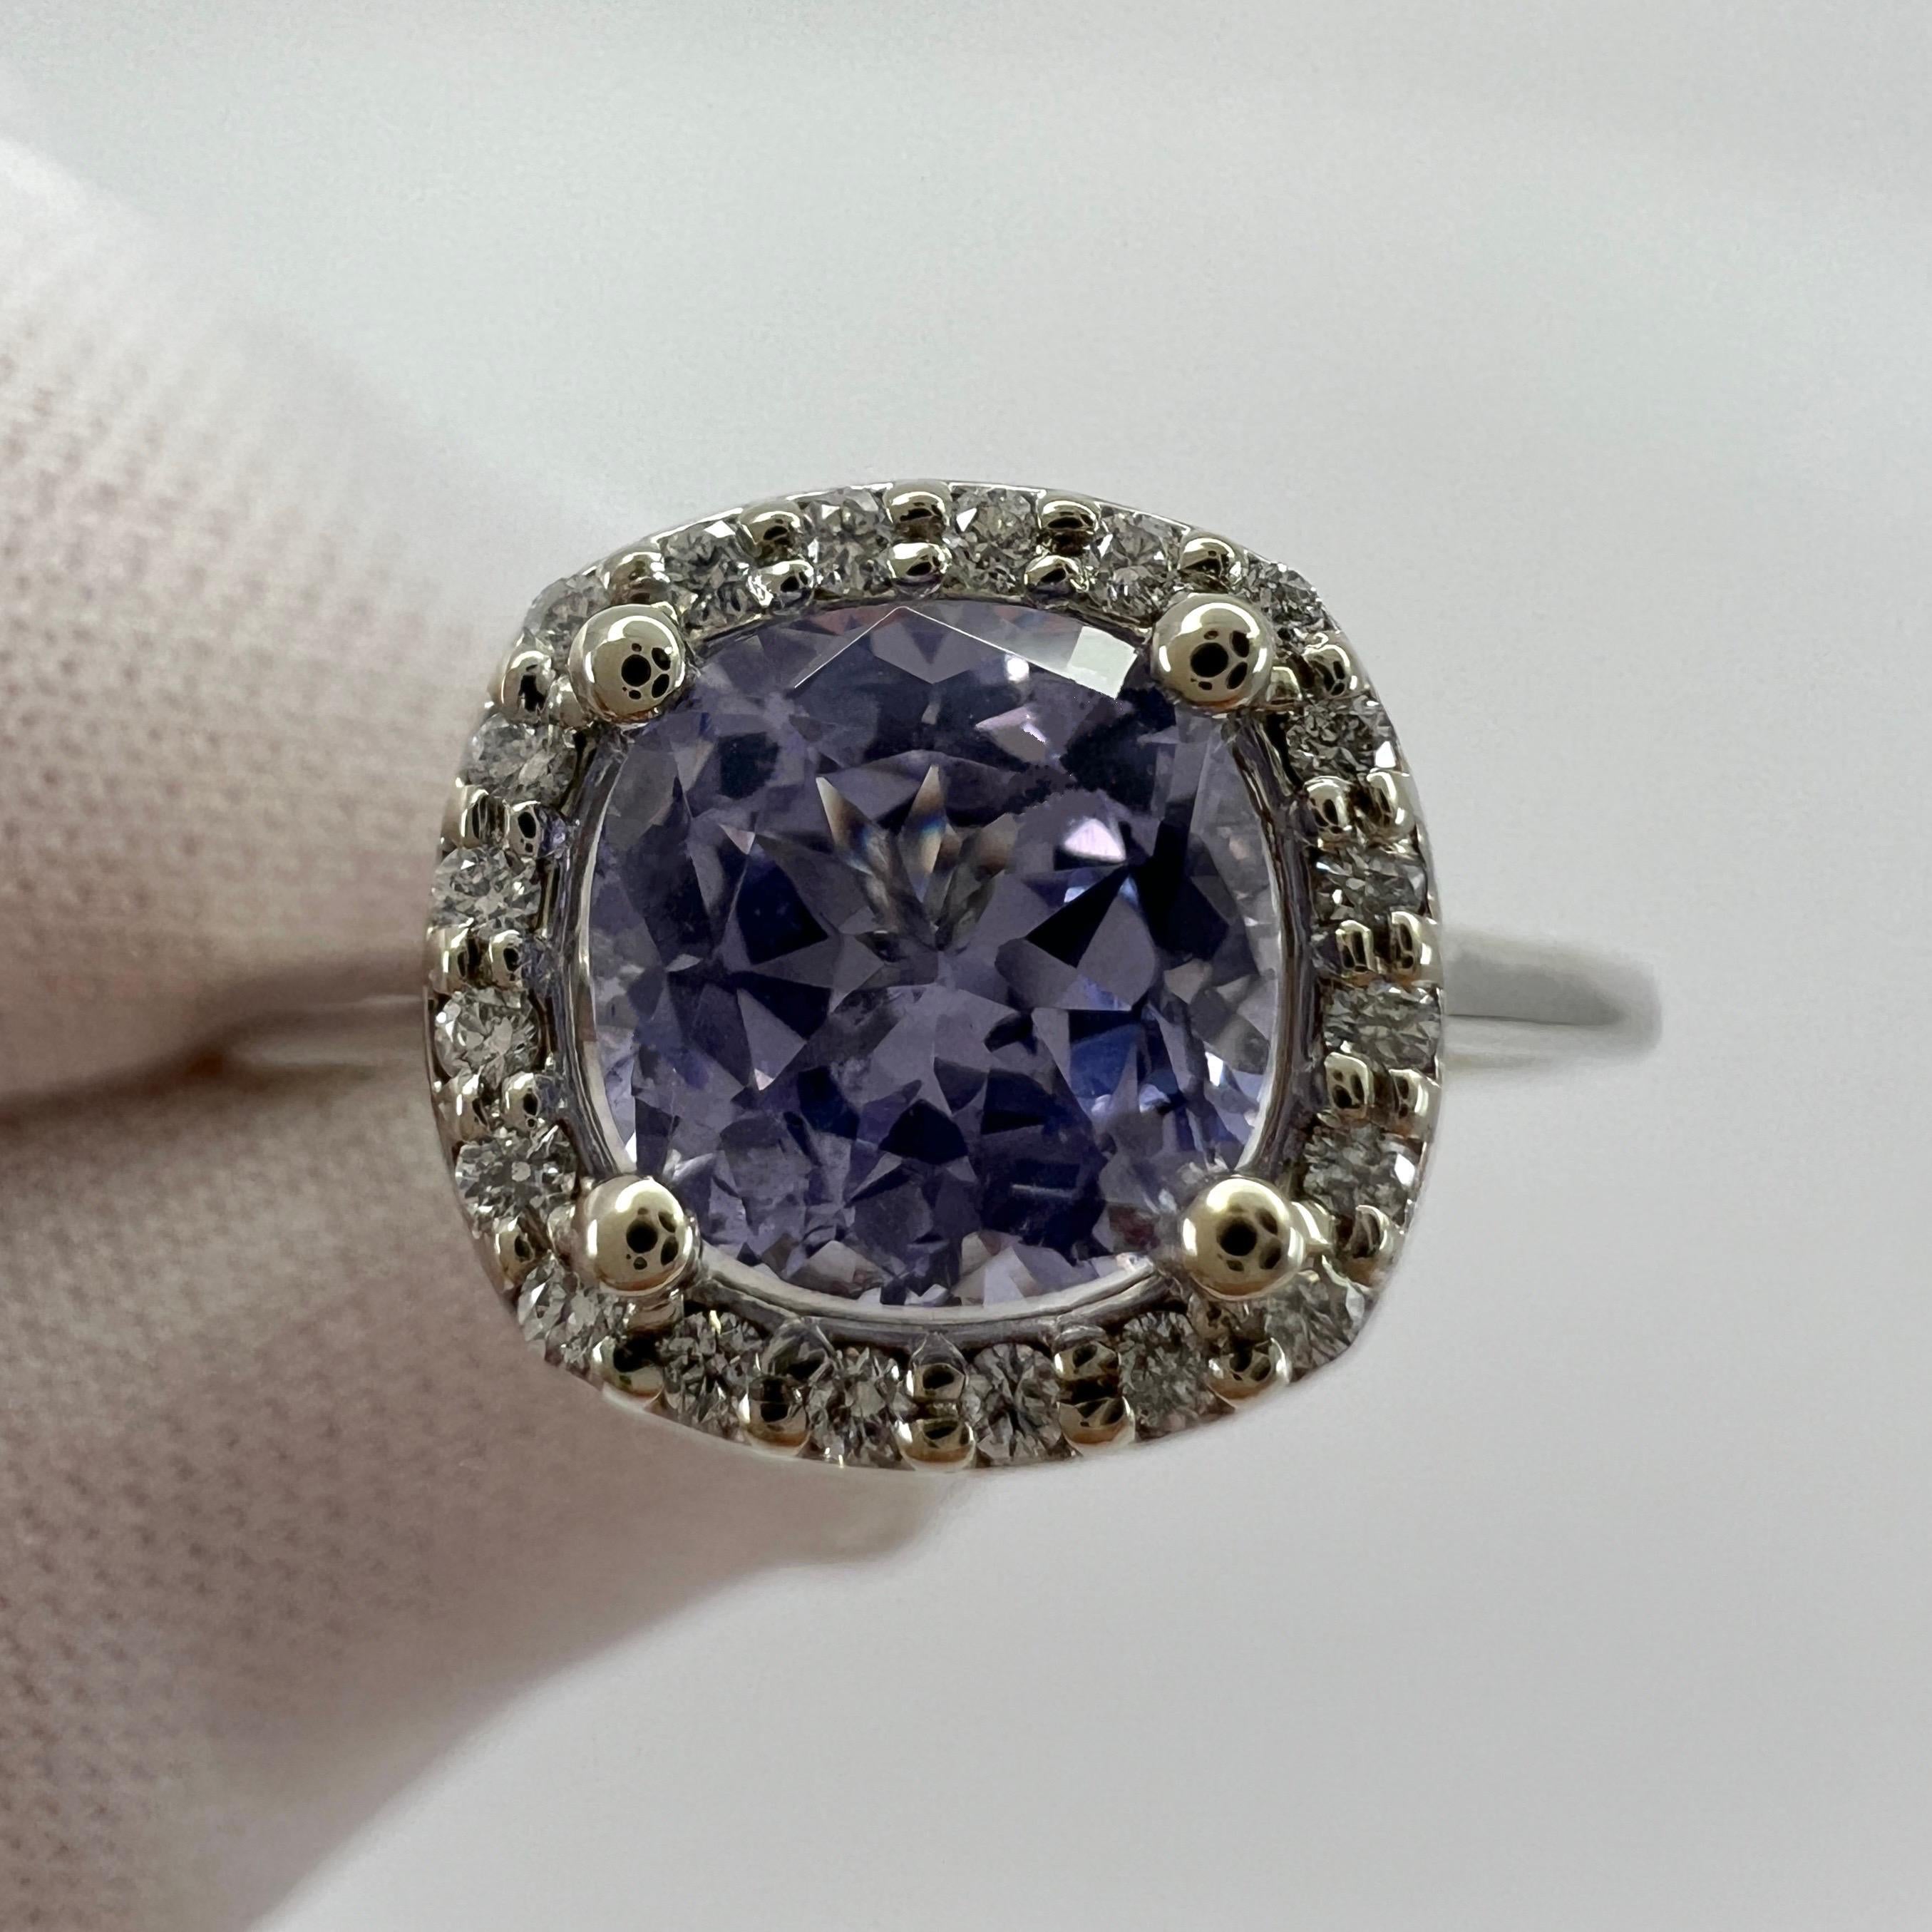 1.02ct Vivid Lilac Purple Spinel & Diamond 18k White Gold Cushion Cut Halo Ring For Sale 7